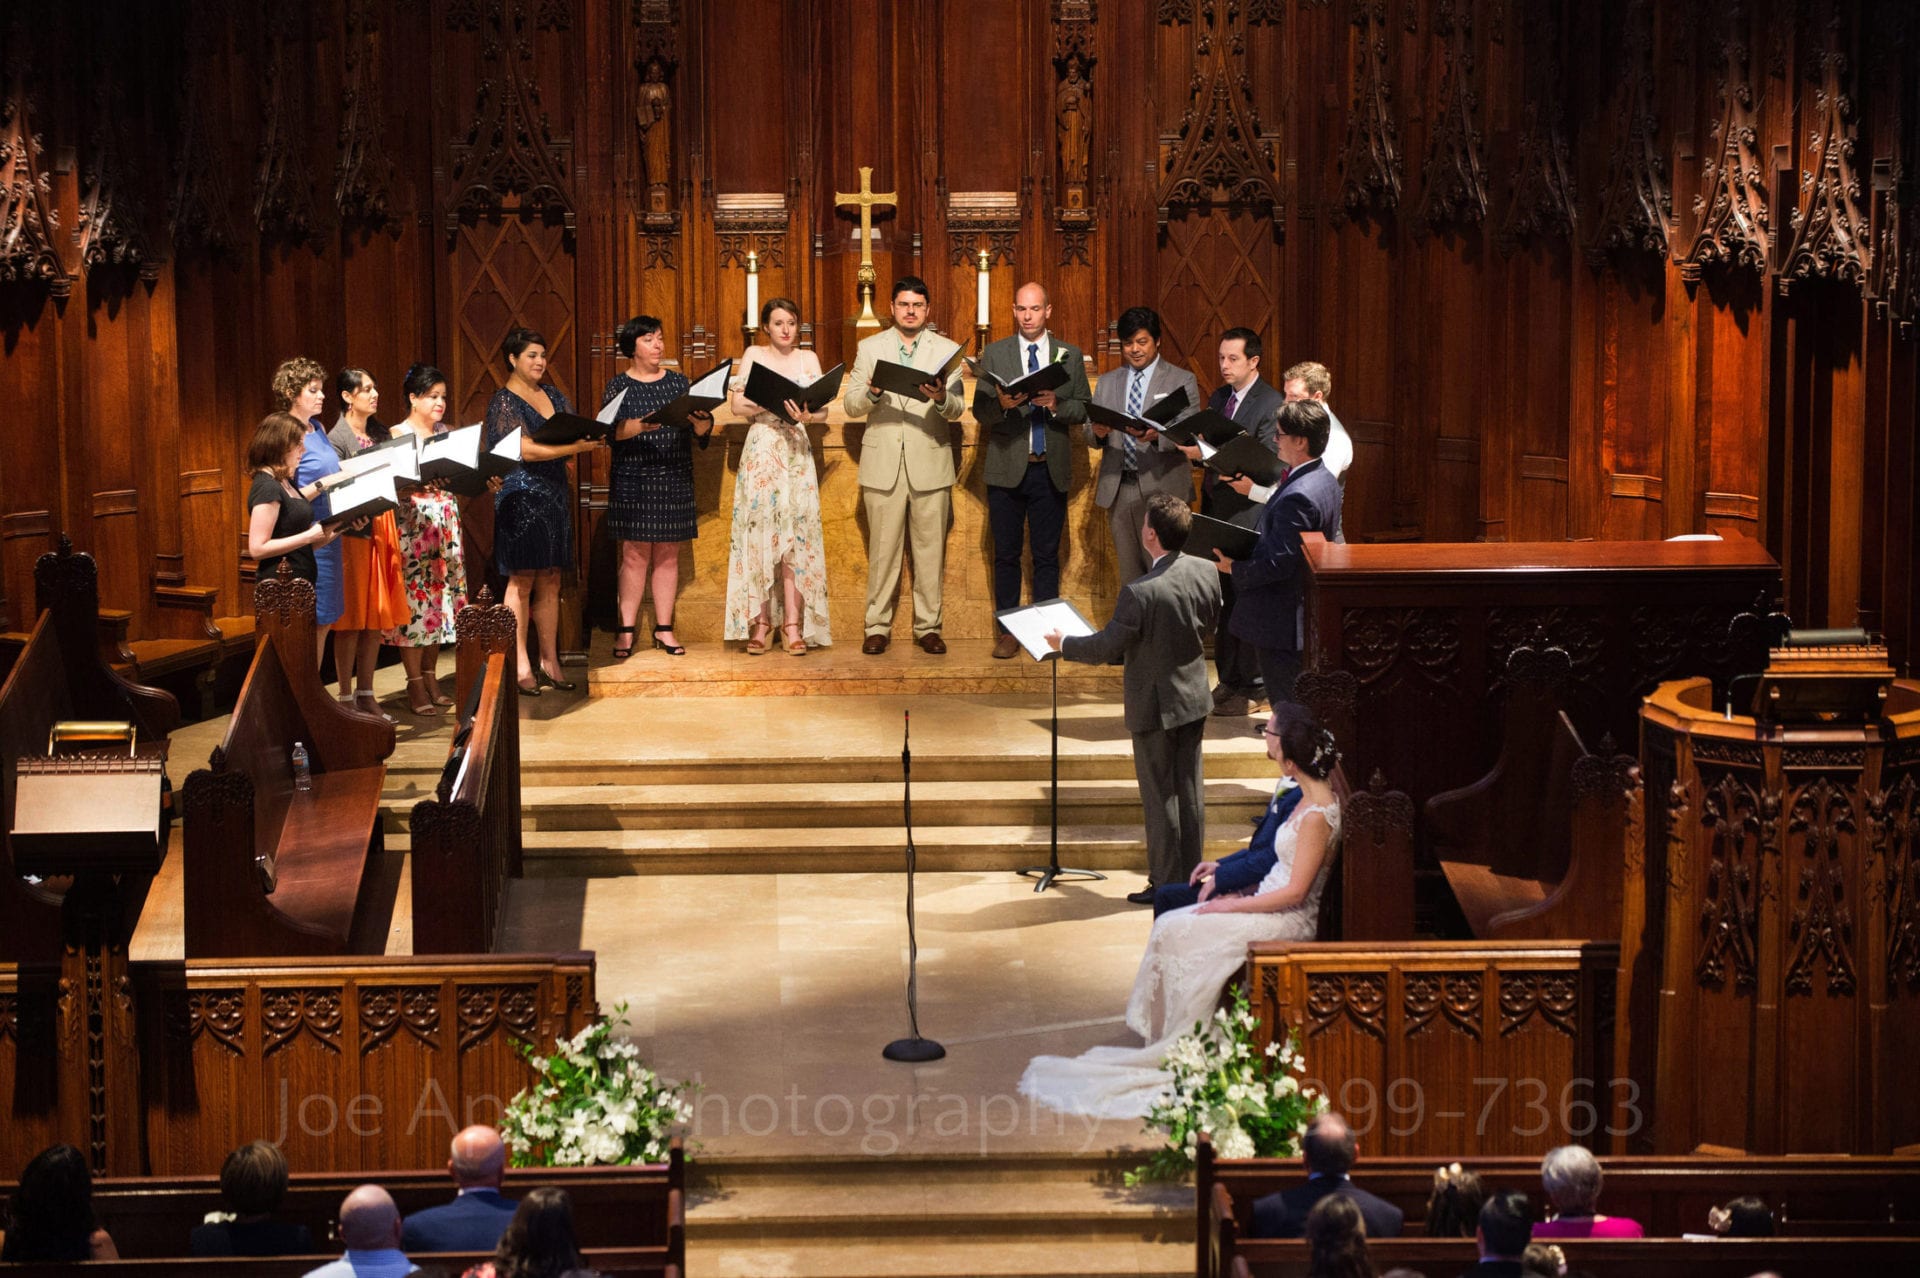 A choir stands in a semi-circle on the altar at Heinz Chapel as the bride and groom sit listening to them.